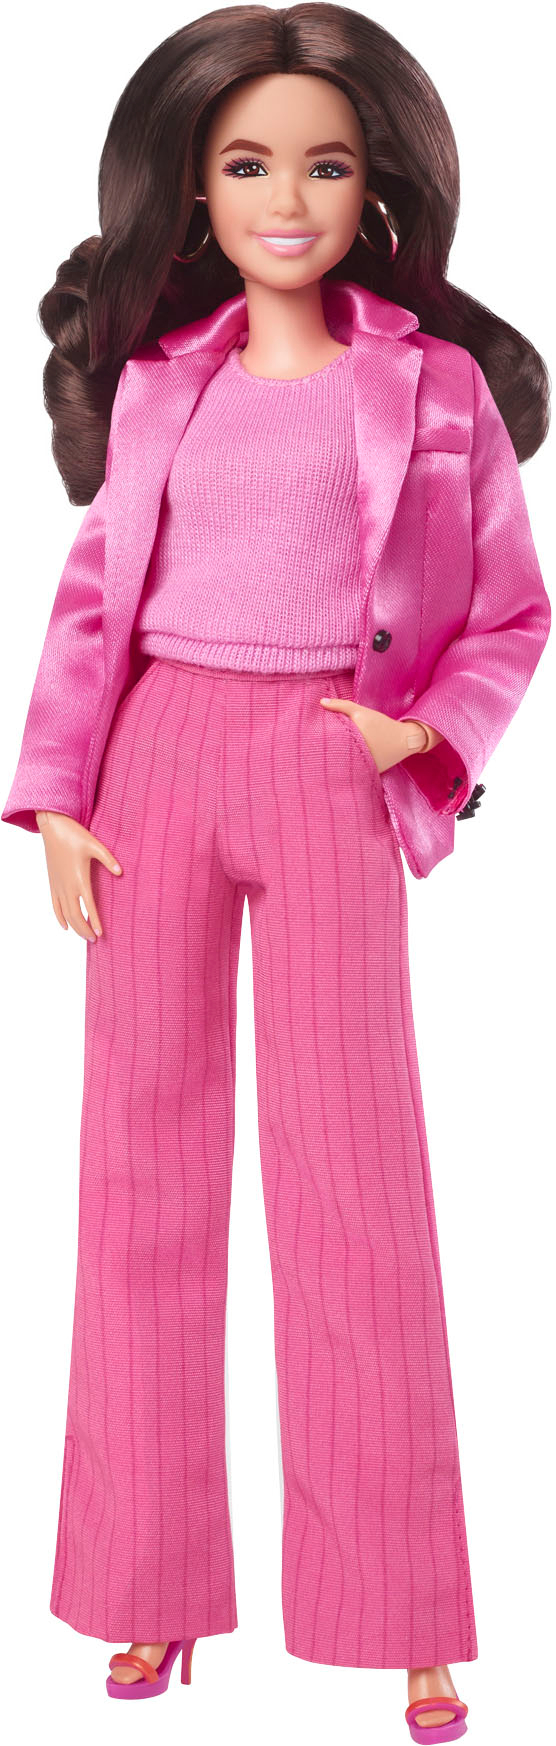 accent kredit kimplante Barbie The Movie 11.5" Collectible Gloria Doll HPJ98 - Best Buy